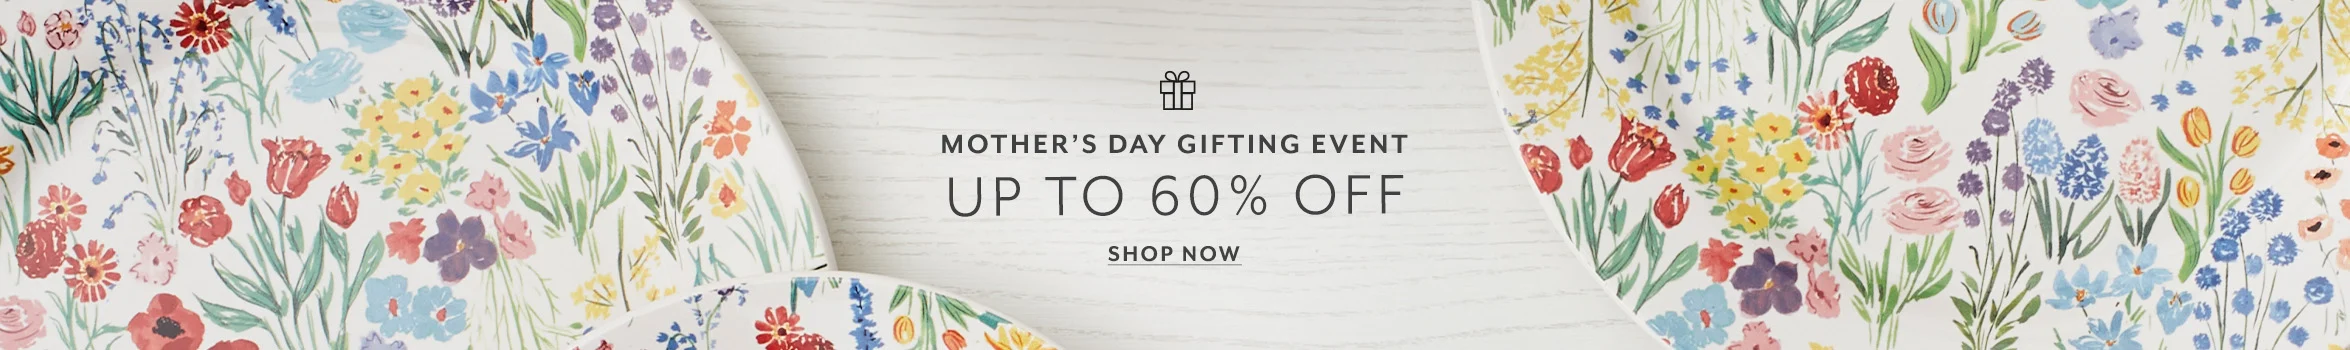 Mother's Day Gifting Event up to 60% off. Shop now.